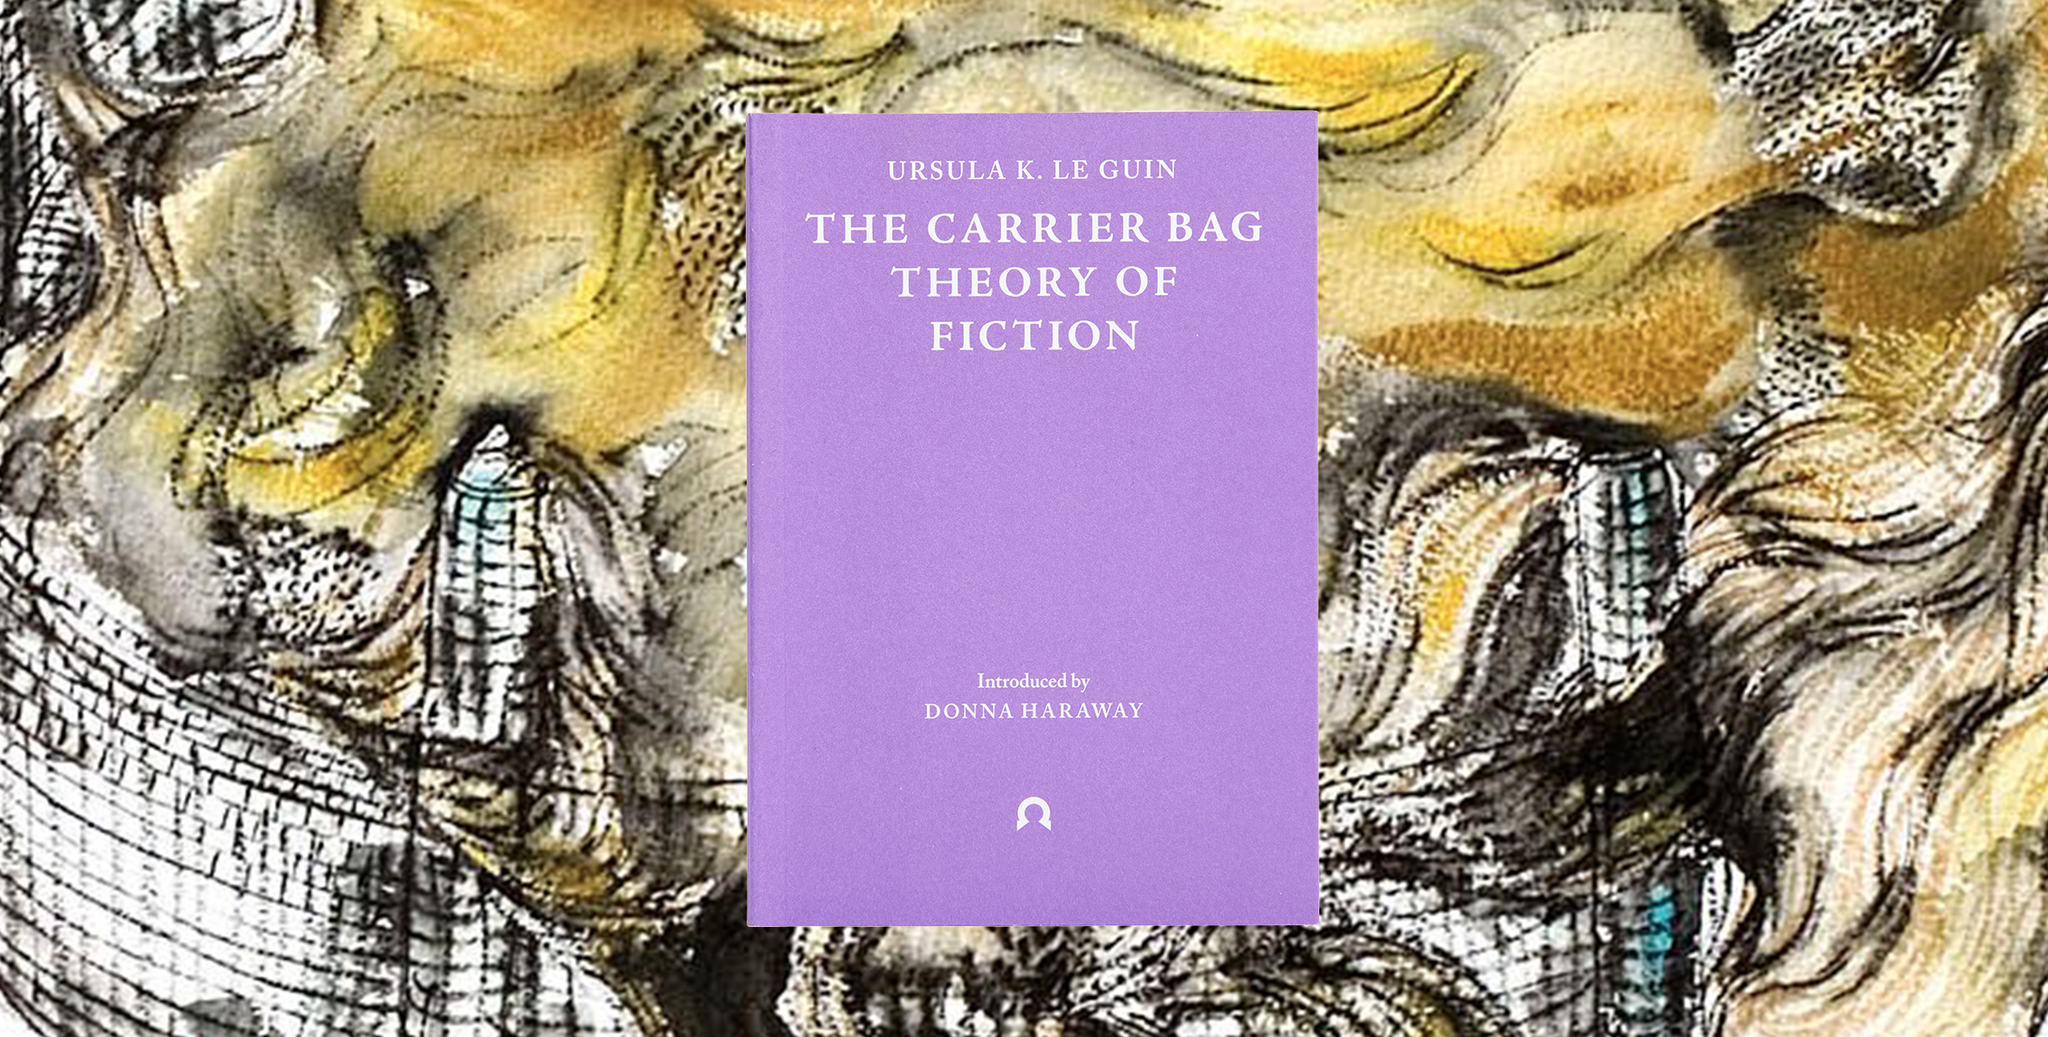 The Carrier Bag Theory of Fiction